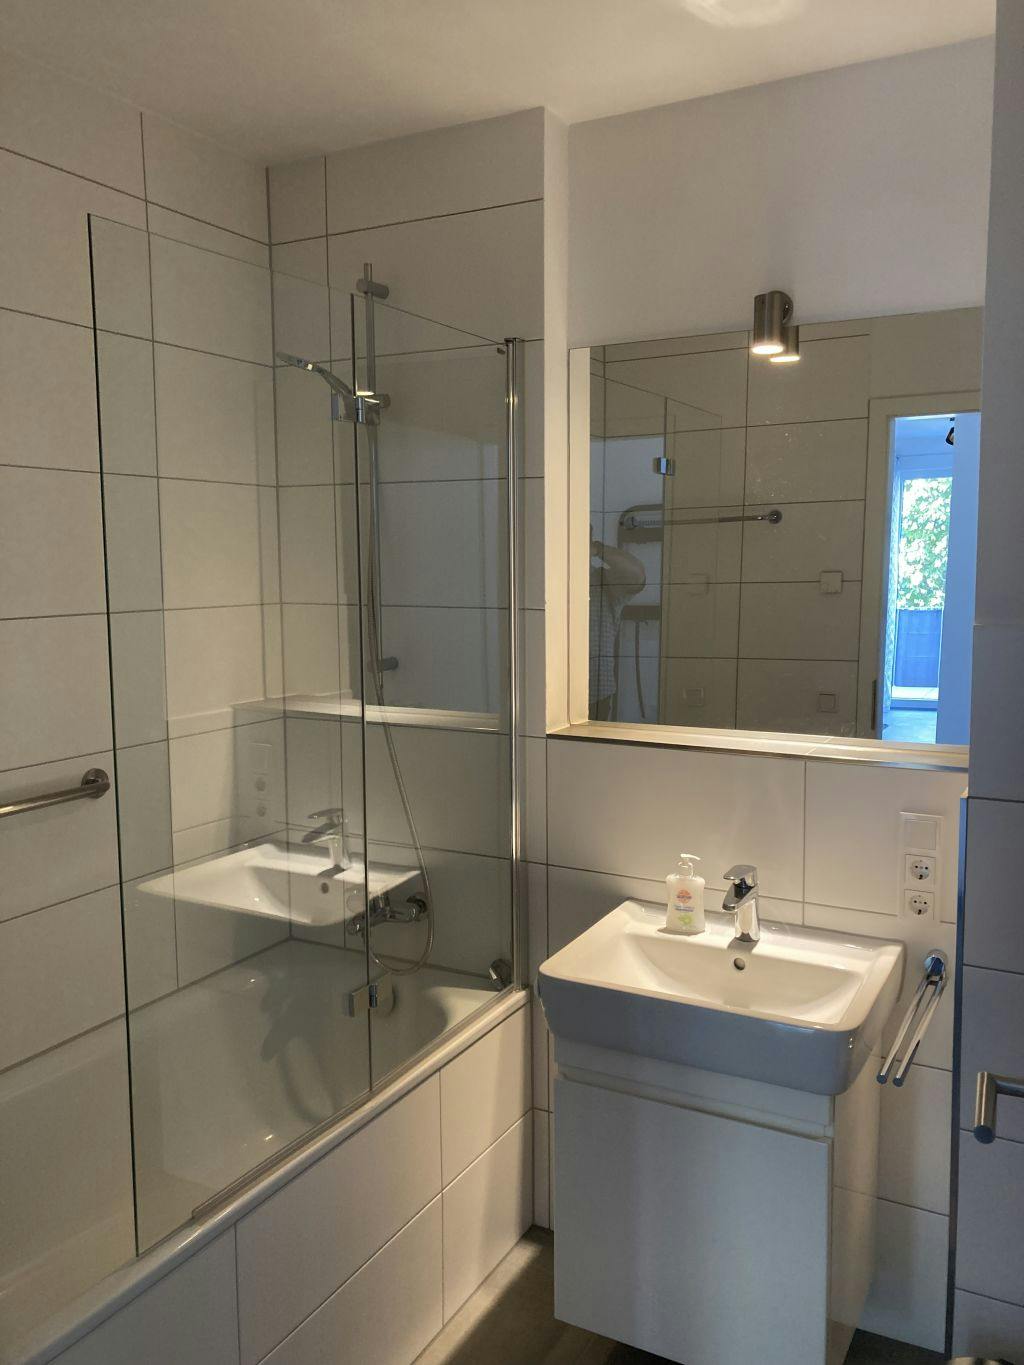 2 room-modern 2020s apartment in in Cologne-Lövenich (West) close to S-Bahn station